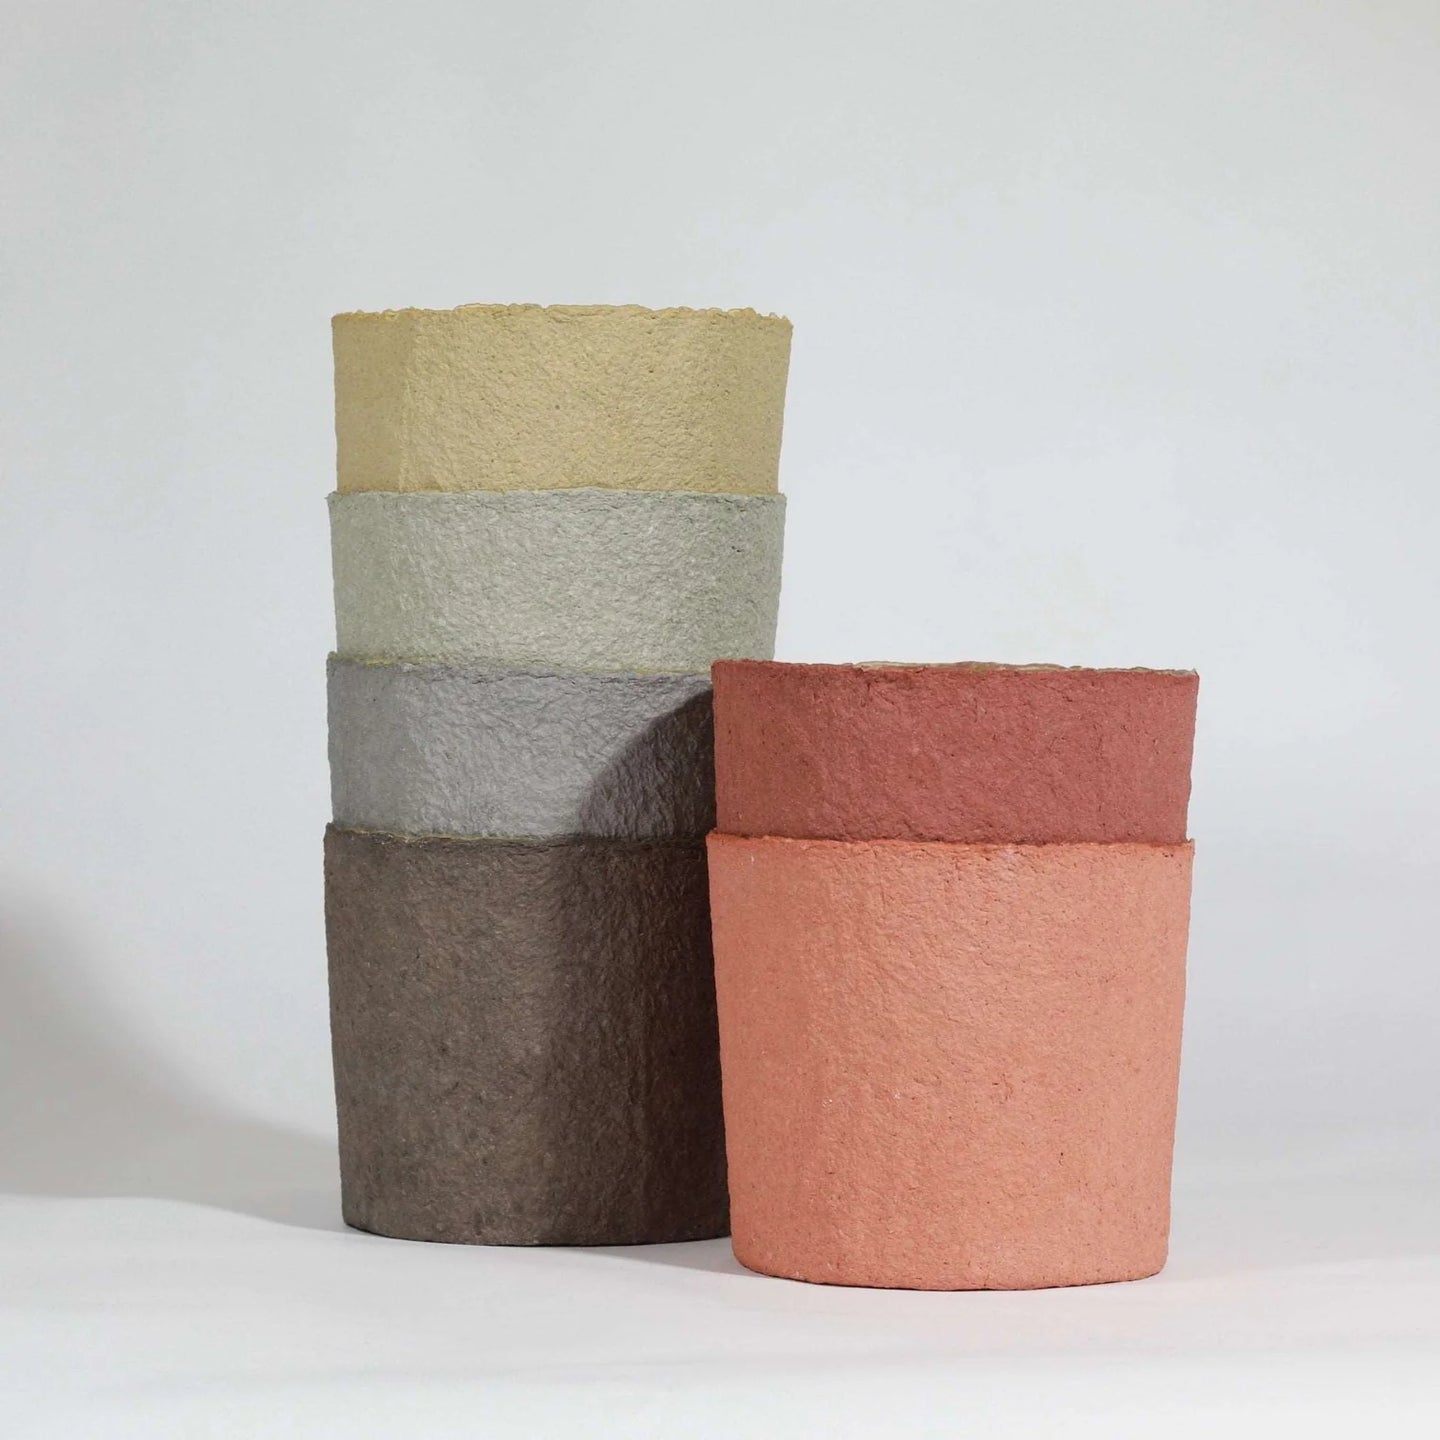 flower-pot-waste-paper-beeswax-studio-visur-the_home_of_sustainable-things